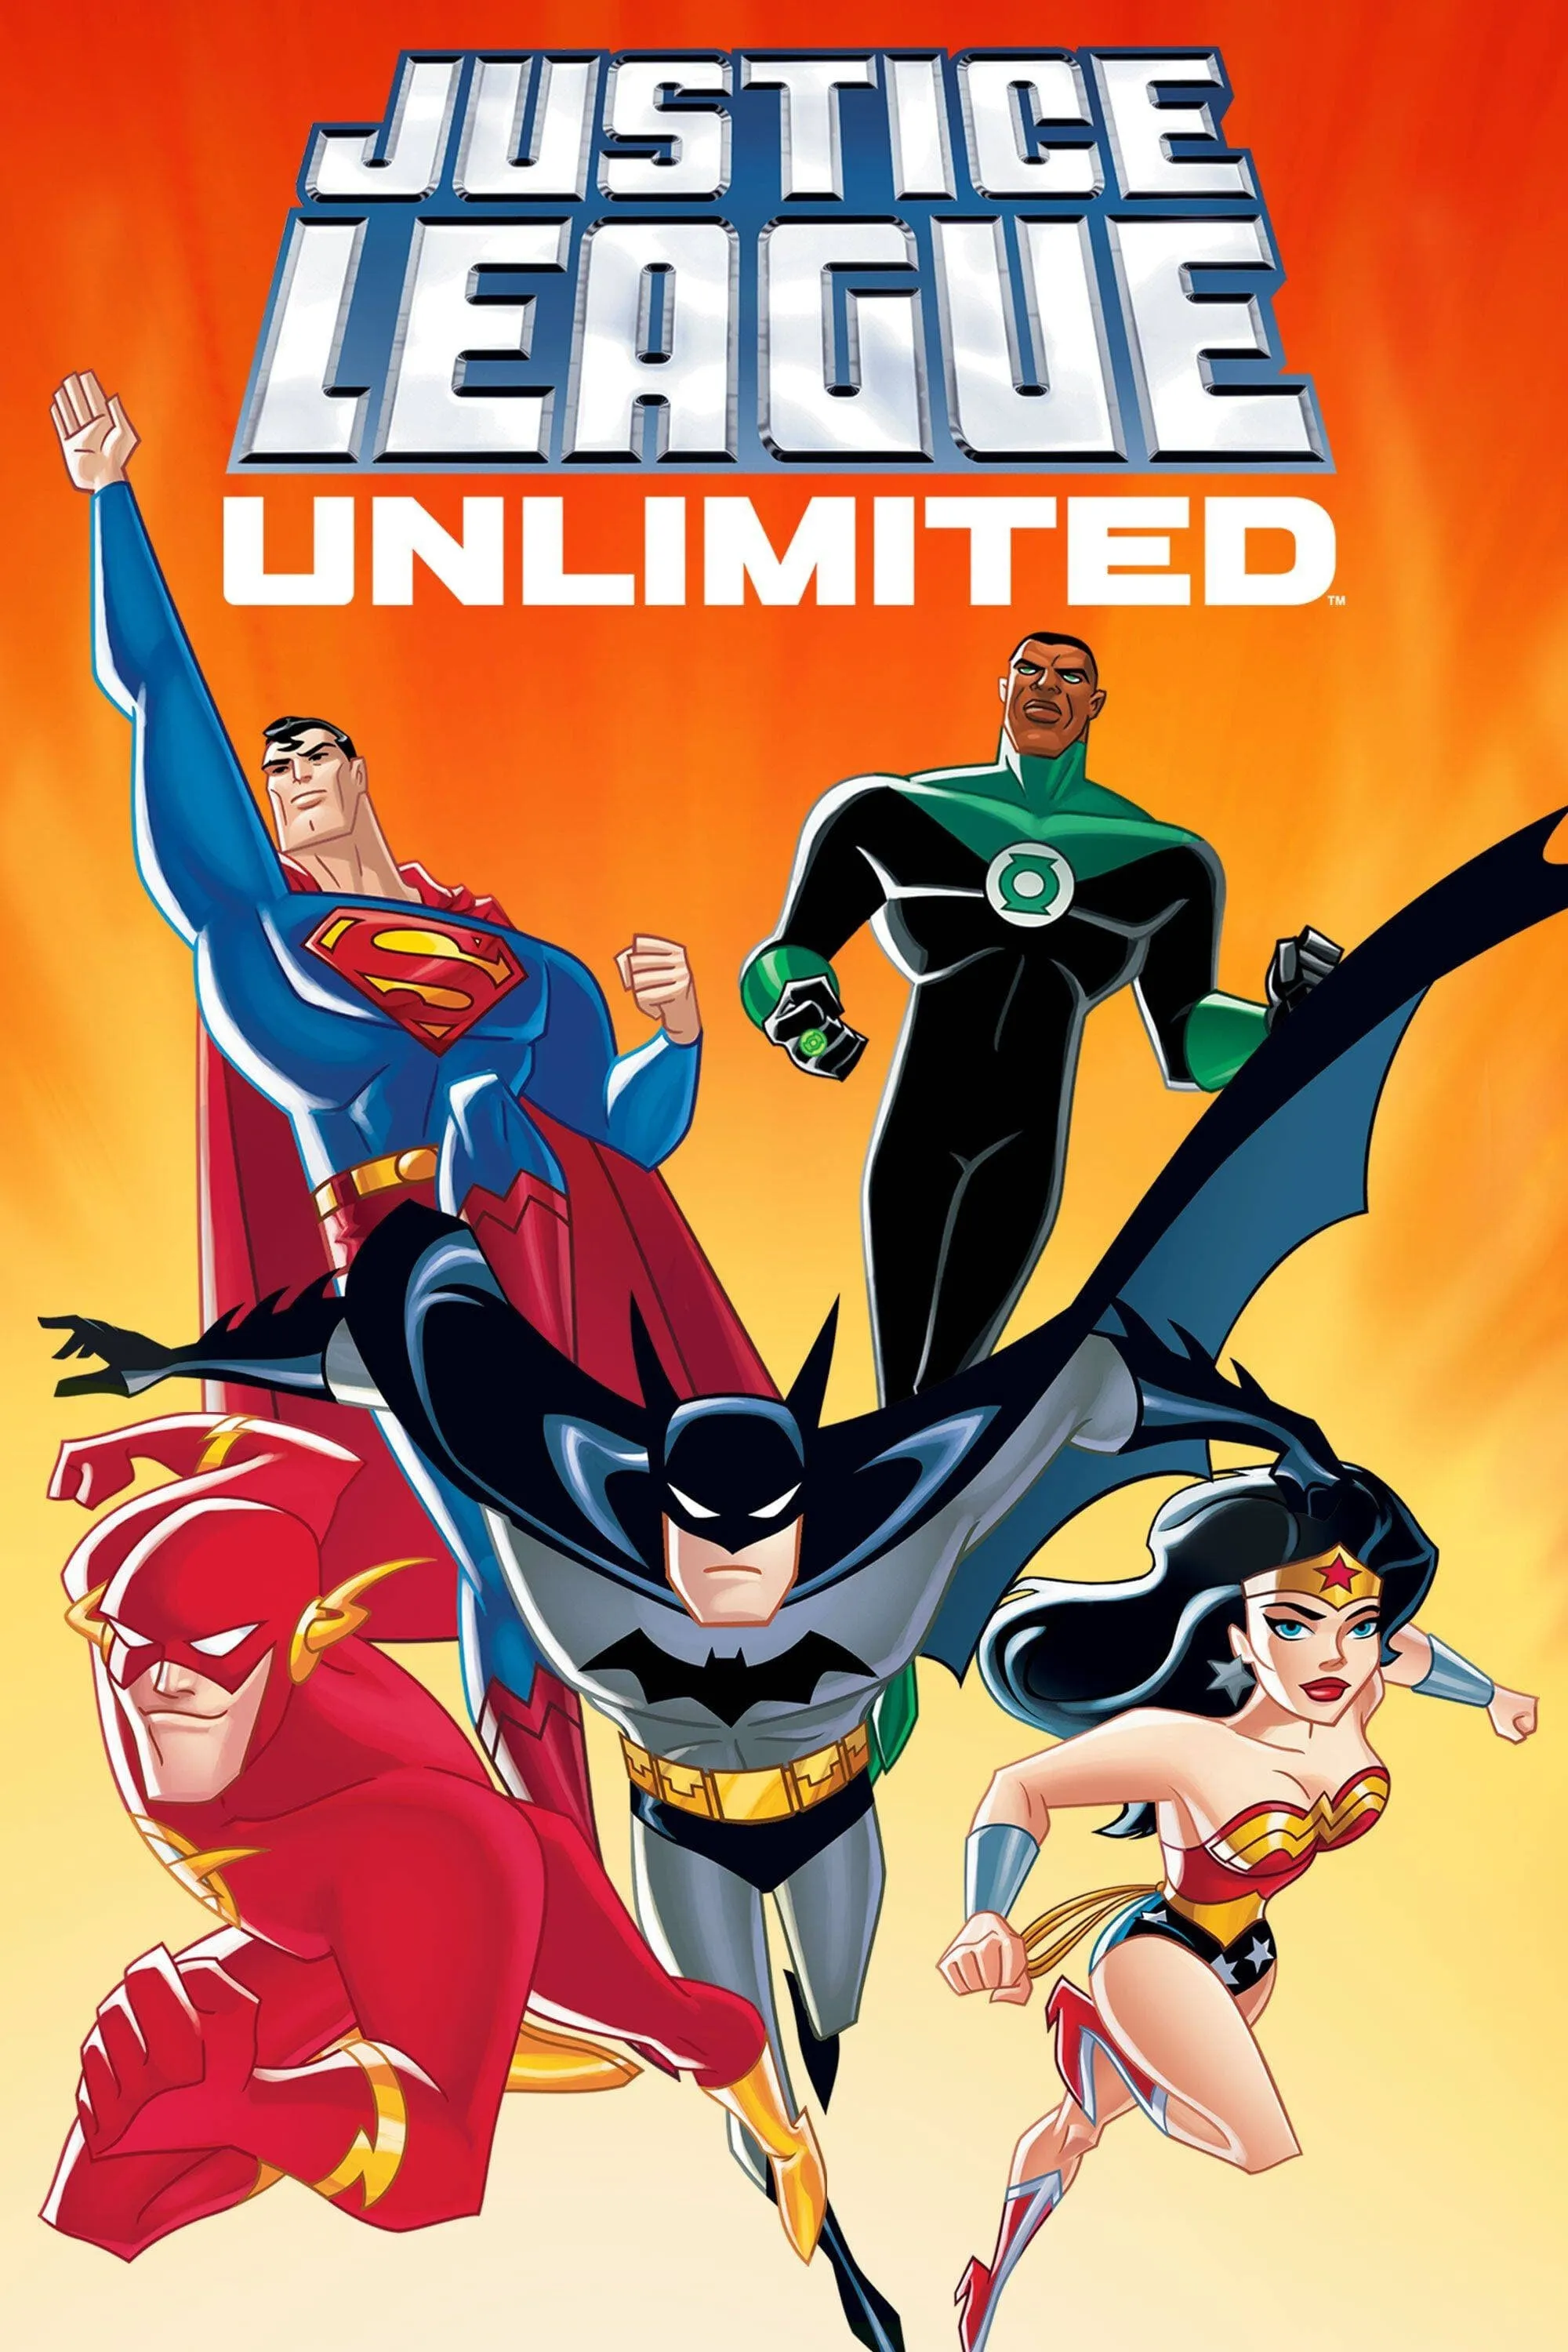 Justice League Unlimited TV Show Information & Trailers | KinoCheck